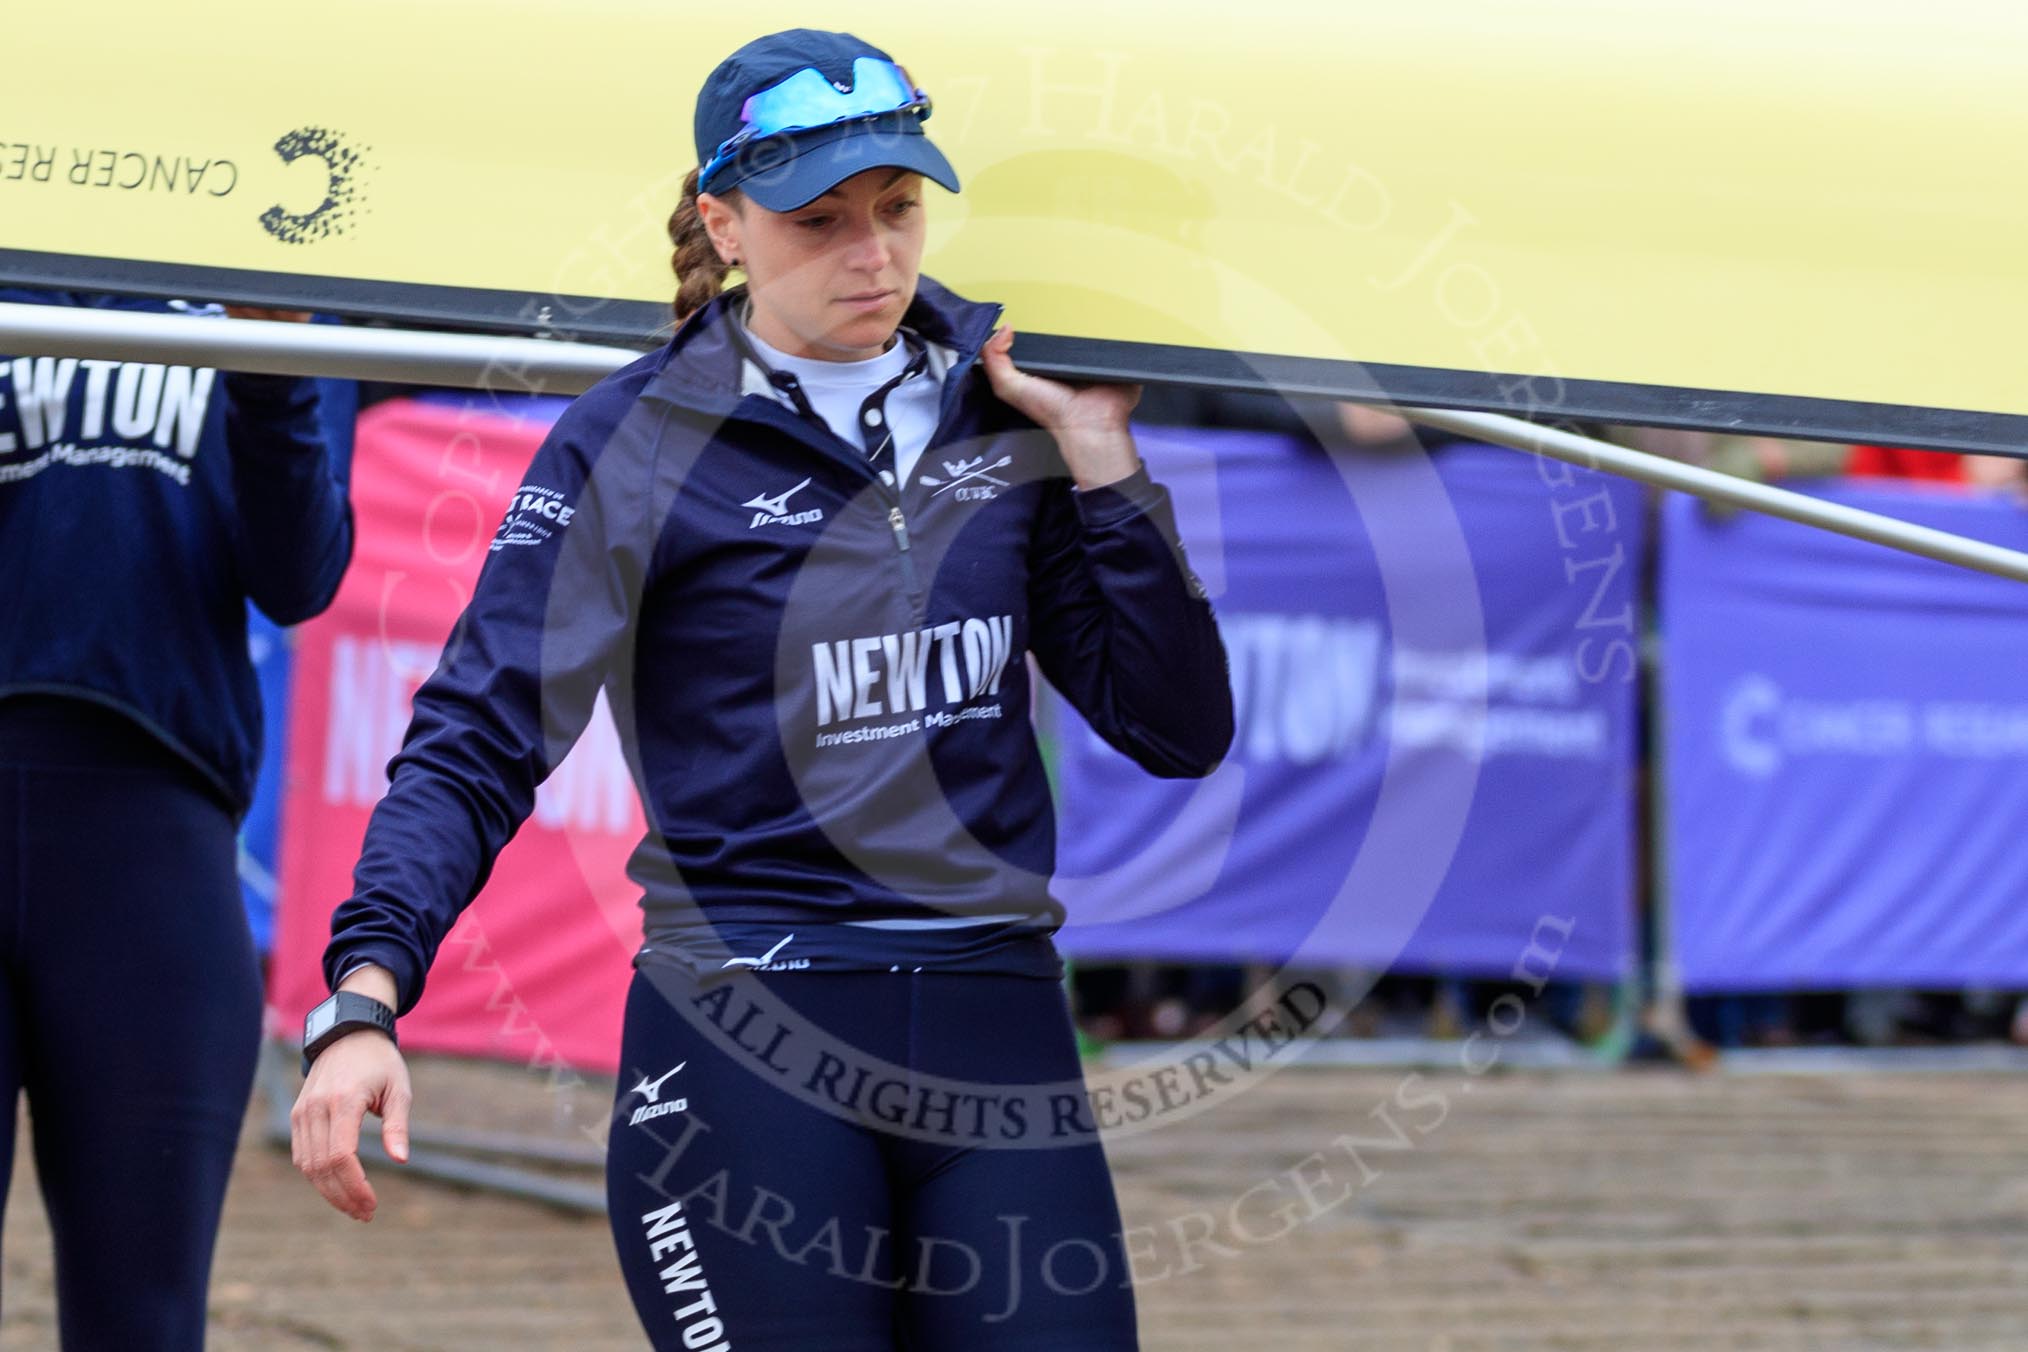 The Cancer Research UK Women's Boat Race 2018: The Oxford women carrying their boat from the boathouse to the river. here 2 seat Katherine Erickson.
River Thames between Putney Bridge and Mortlake,
London SW15,

United Kingdom,
on 24 March 2018 at 15:43, image #95